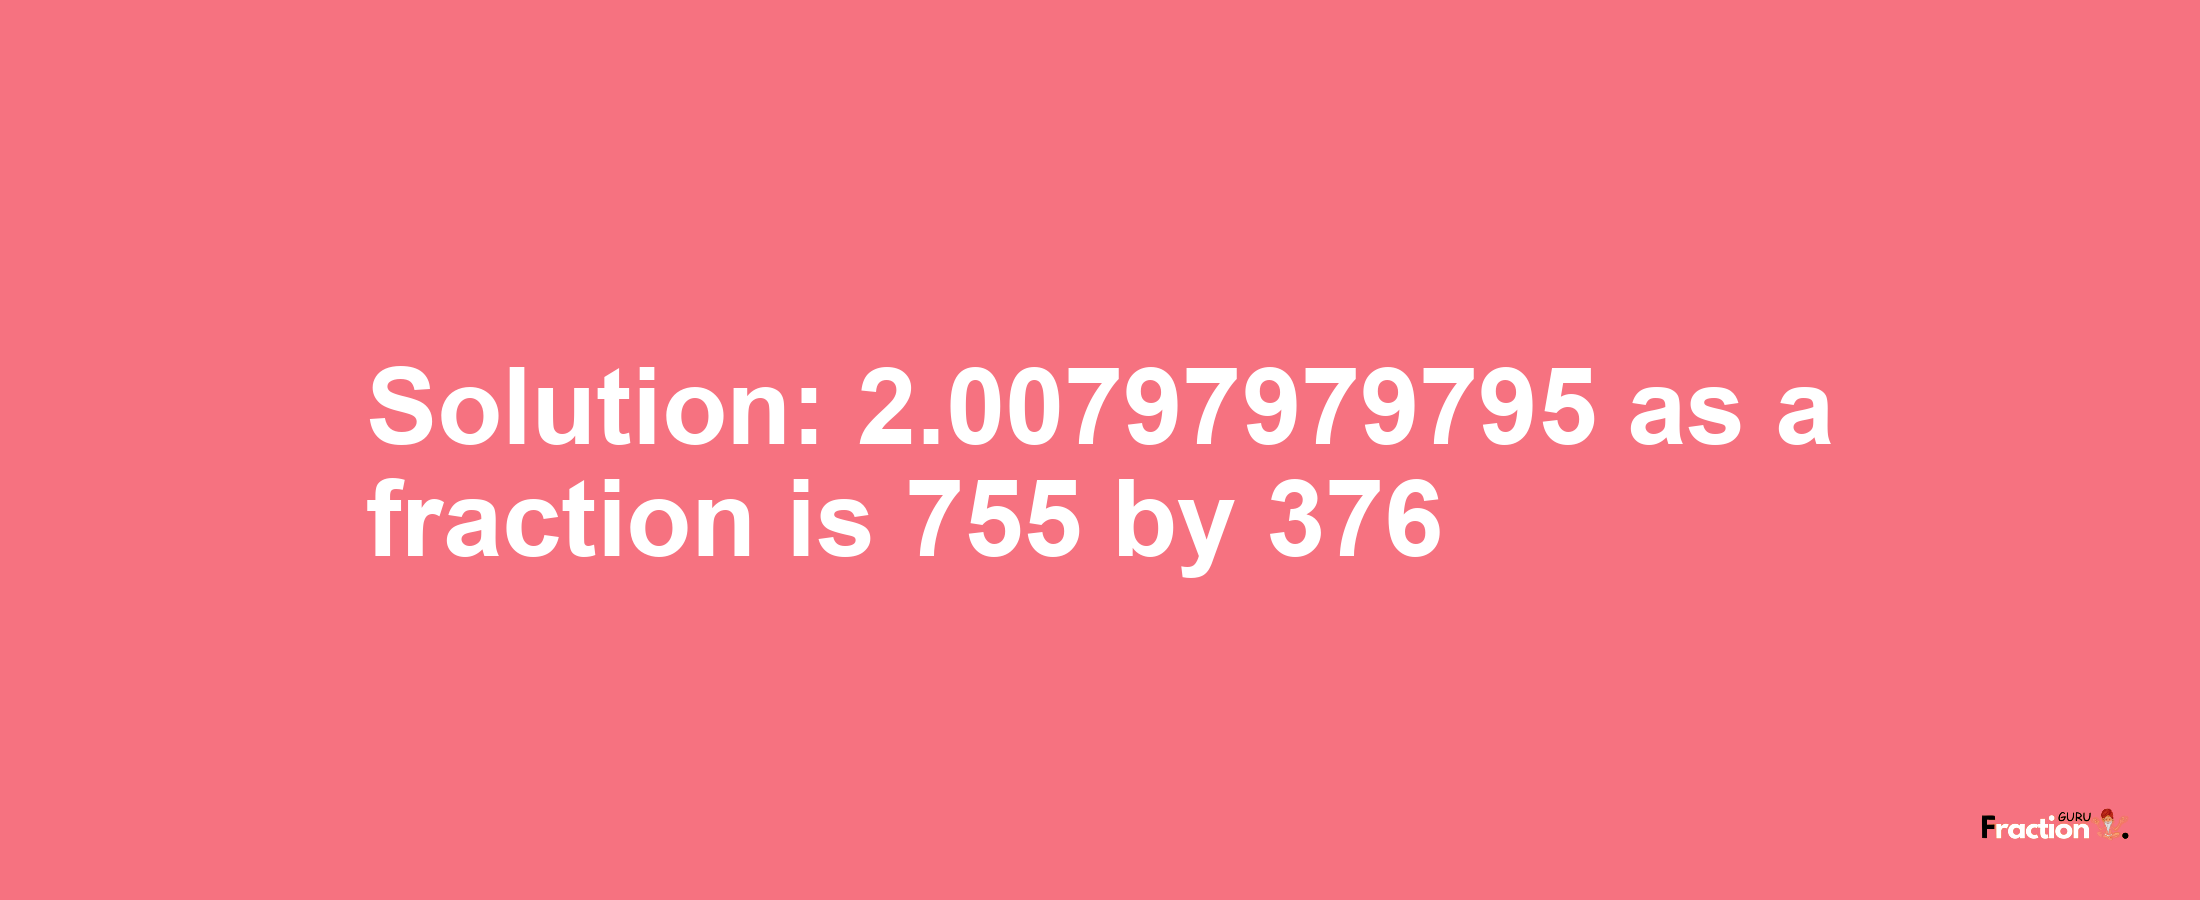 Solution:2.00797979795 as a fraction is 755/376